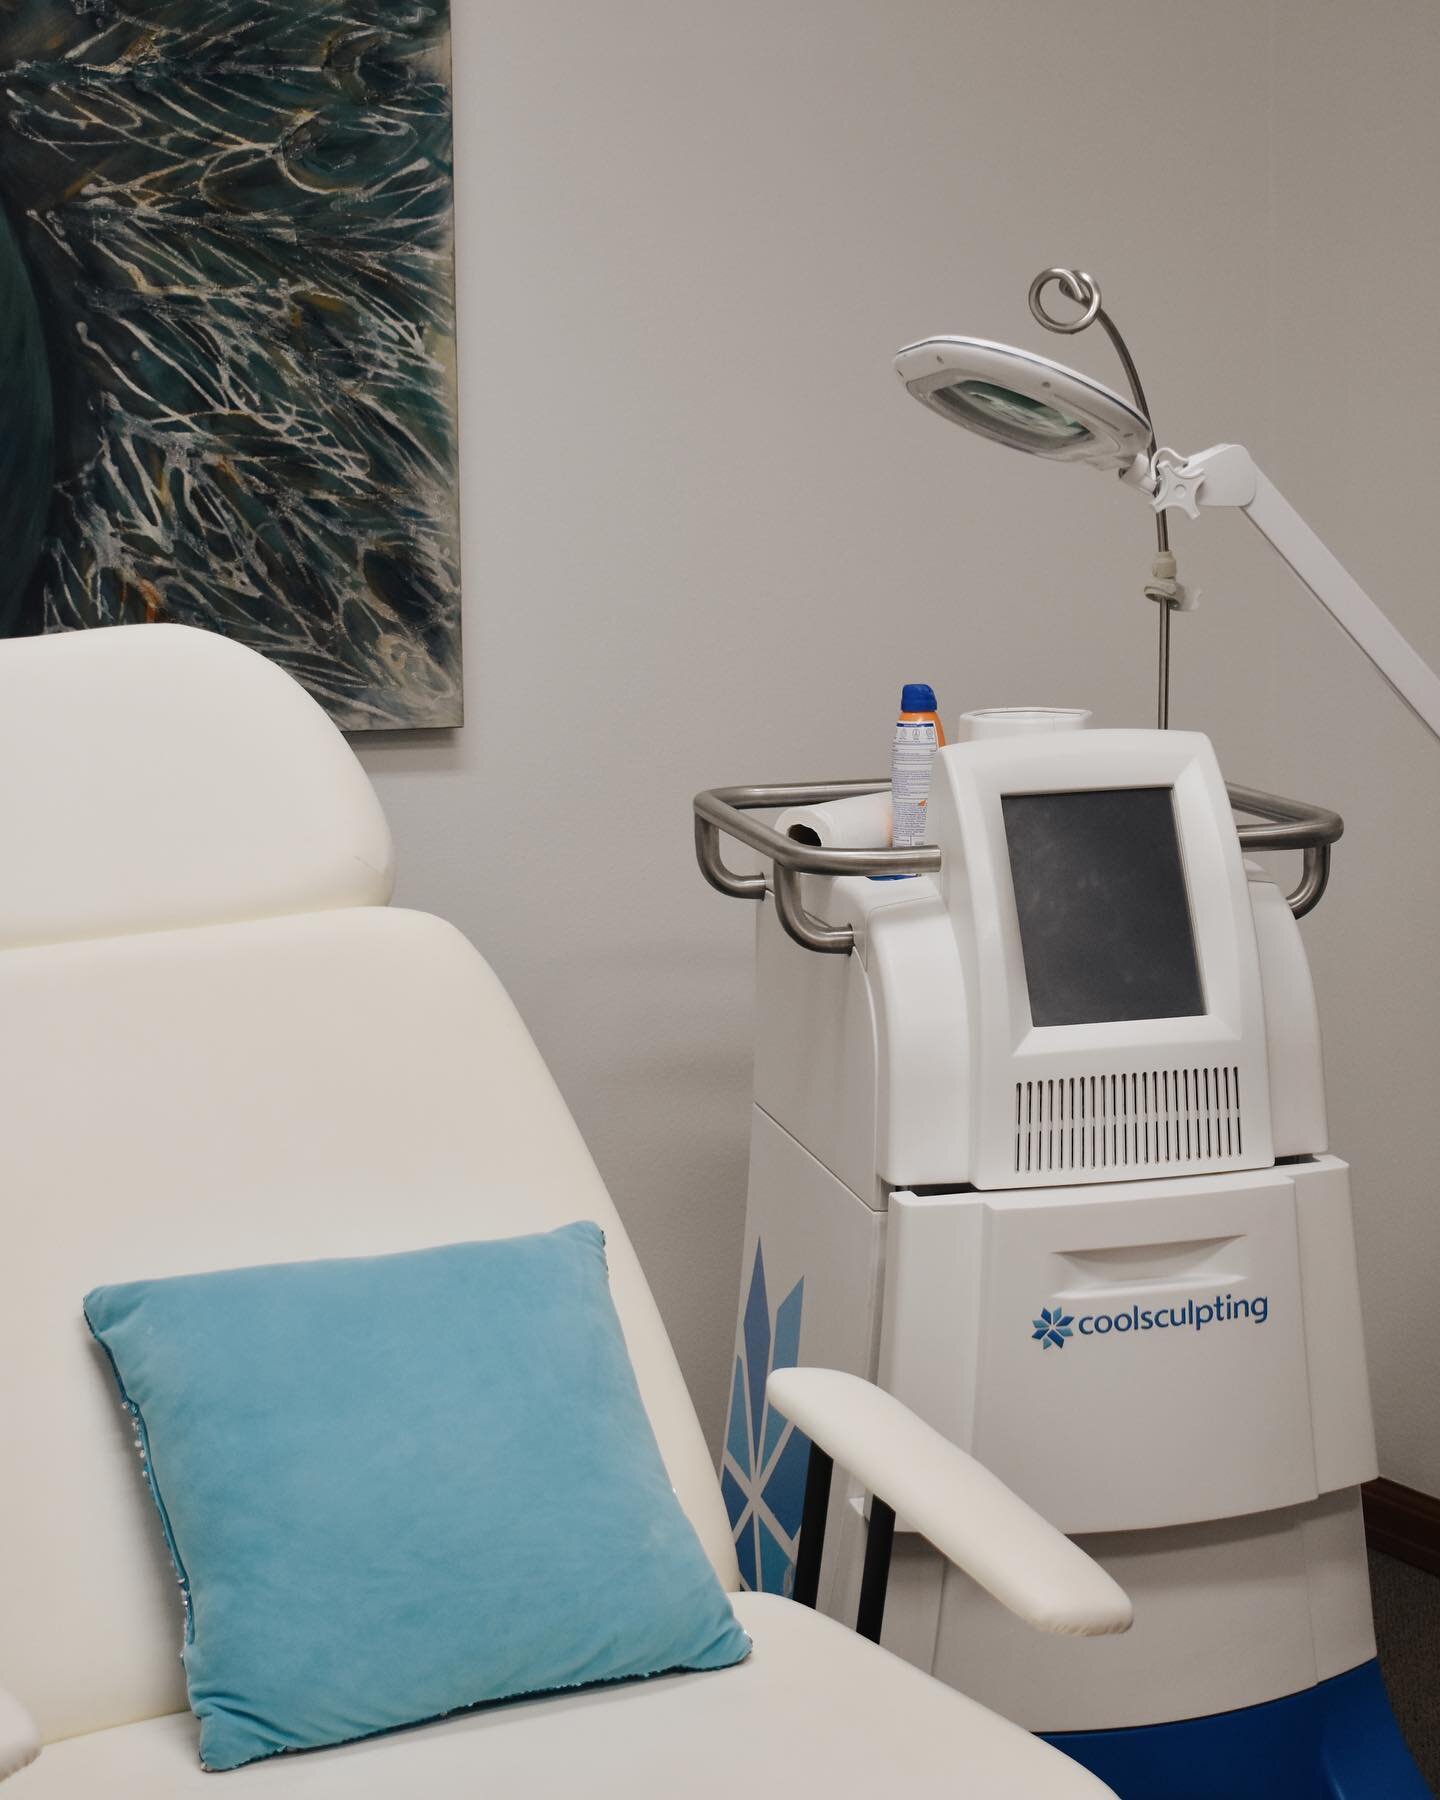 CoolSculpting❄️.

Are you seeking a non-invasive solution to achieve your desired body shape?.

Look no further than CoolSculpting! This innovative service can help you achieve your desired look without the need for surgery. Say goodbye to the hassle